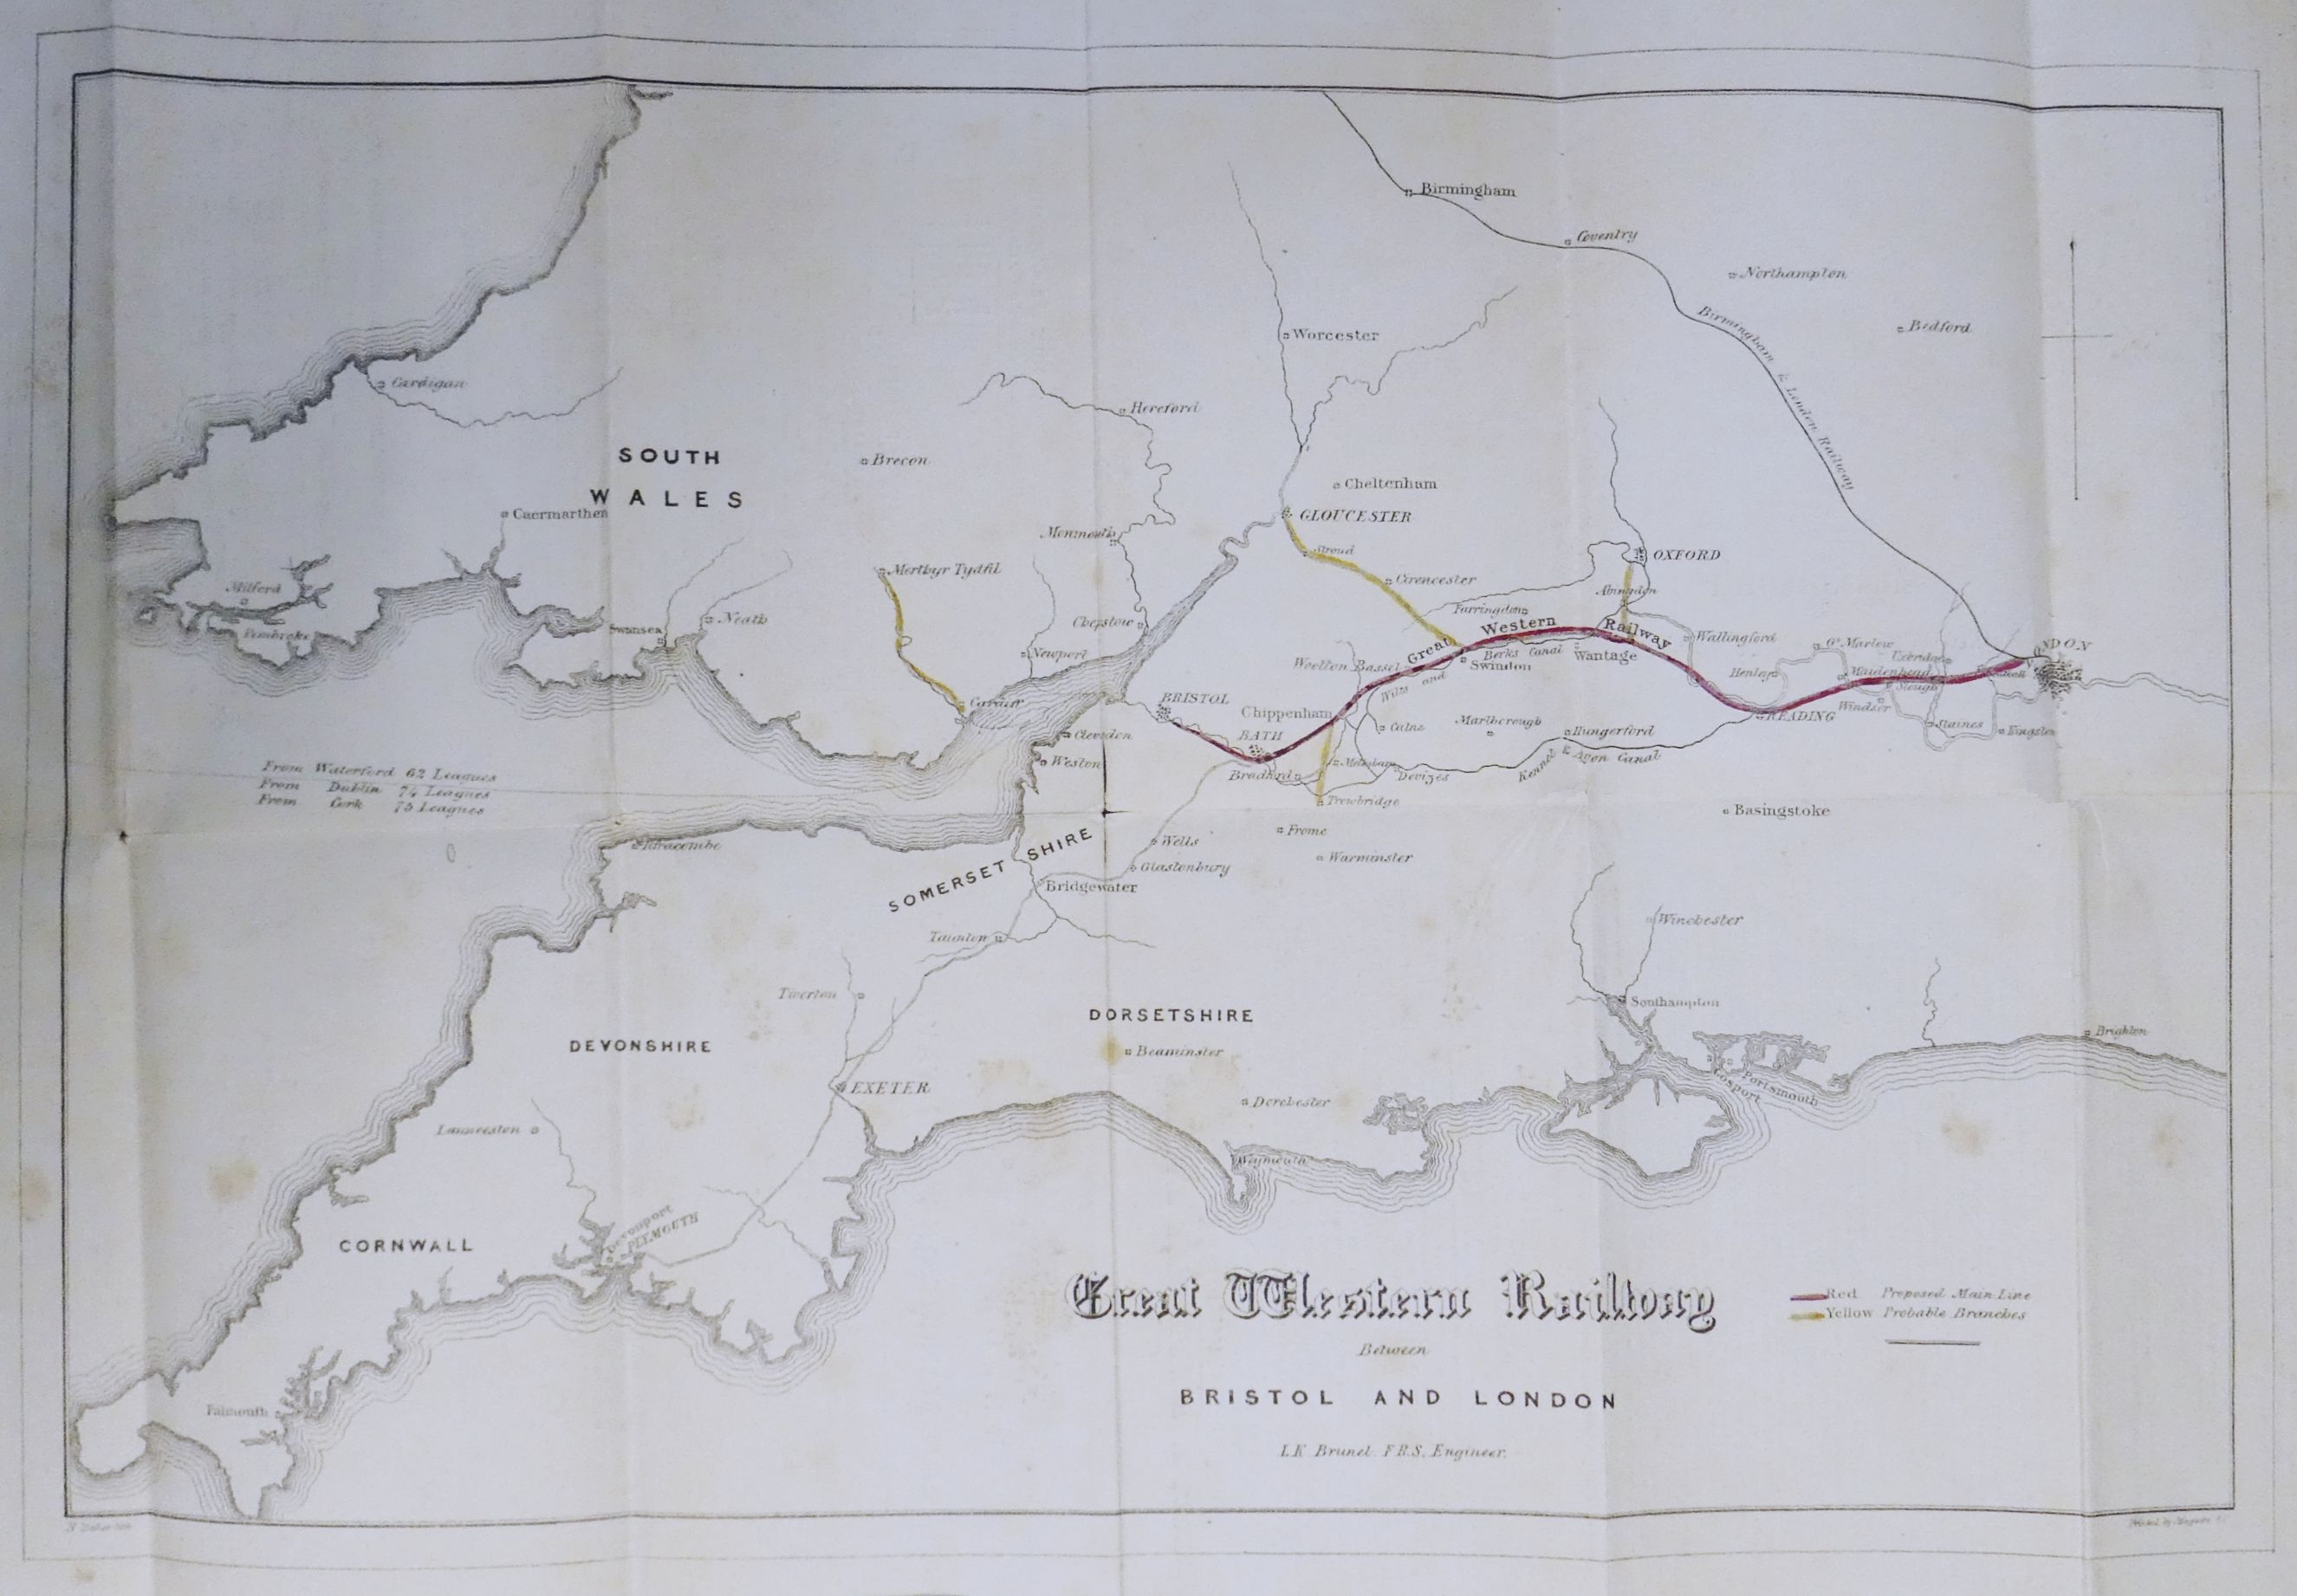 ((Image gwr1834-map-whole-P1010288.jpg goes here))